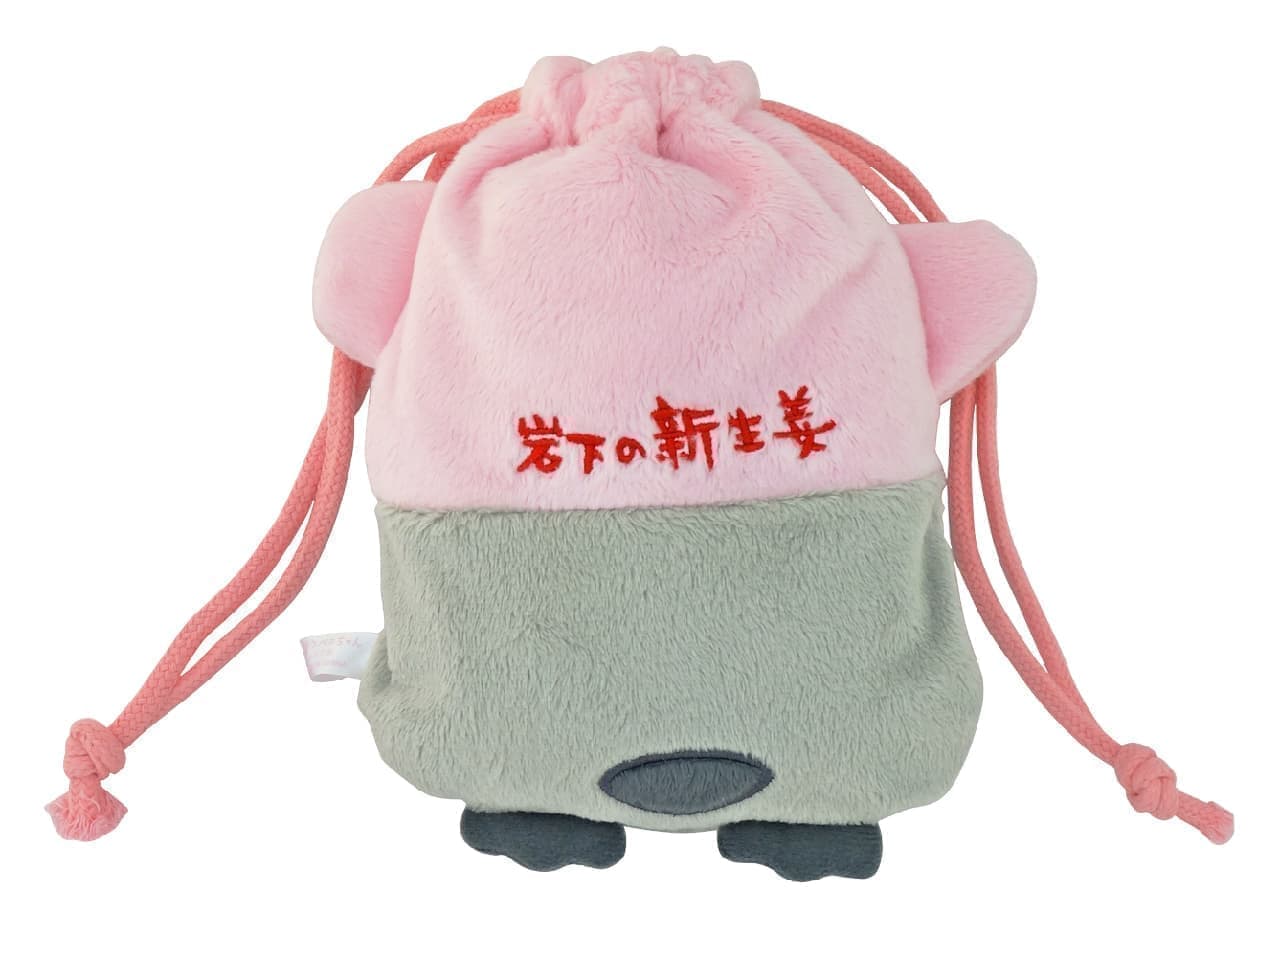 The second collaboration between Iwashita New Ginger and Koupen-Mr. Evil Enaga is also cute pink